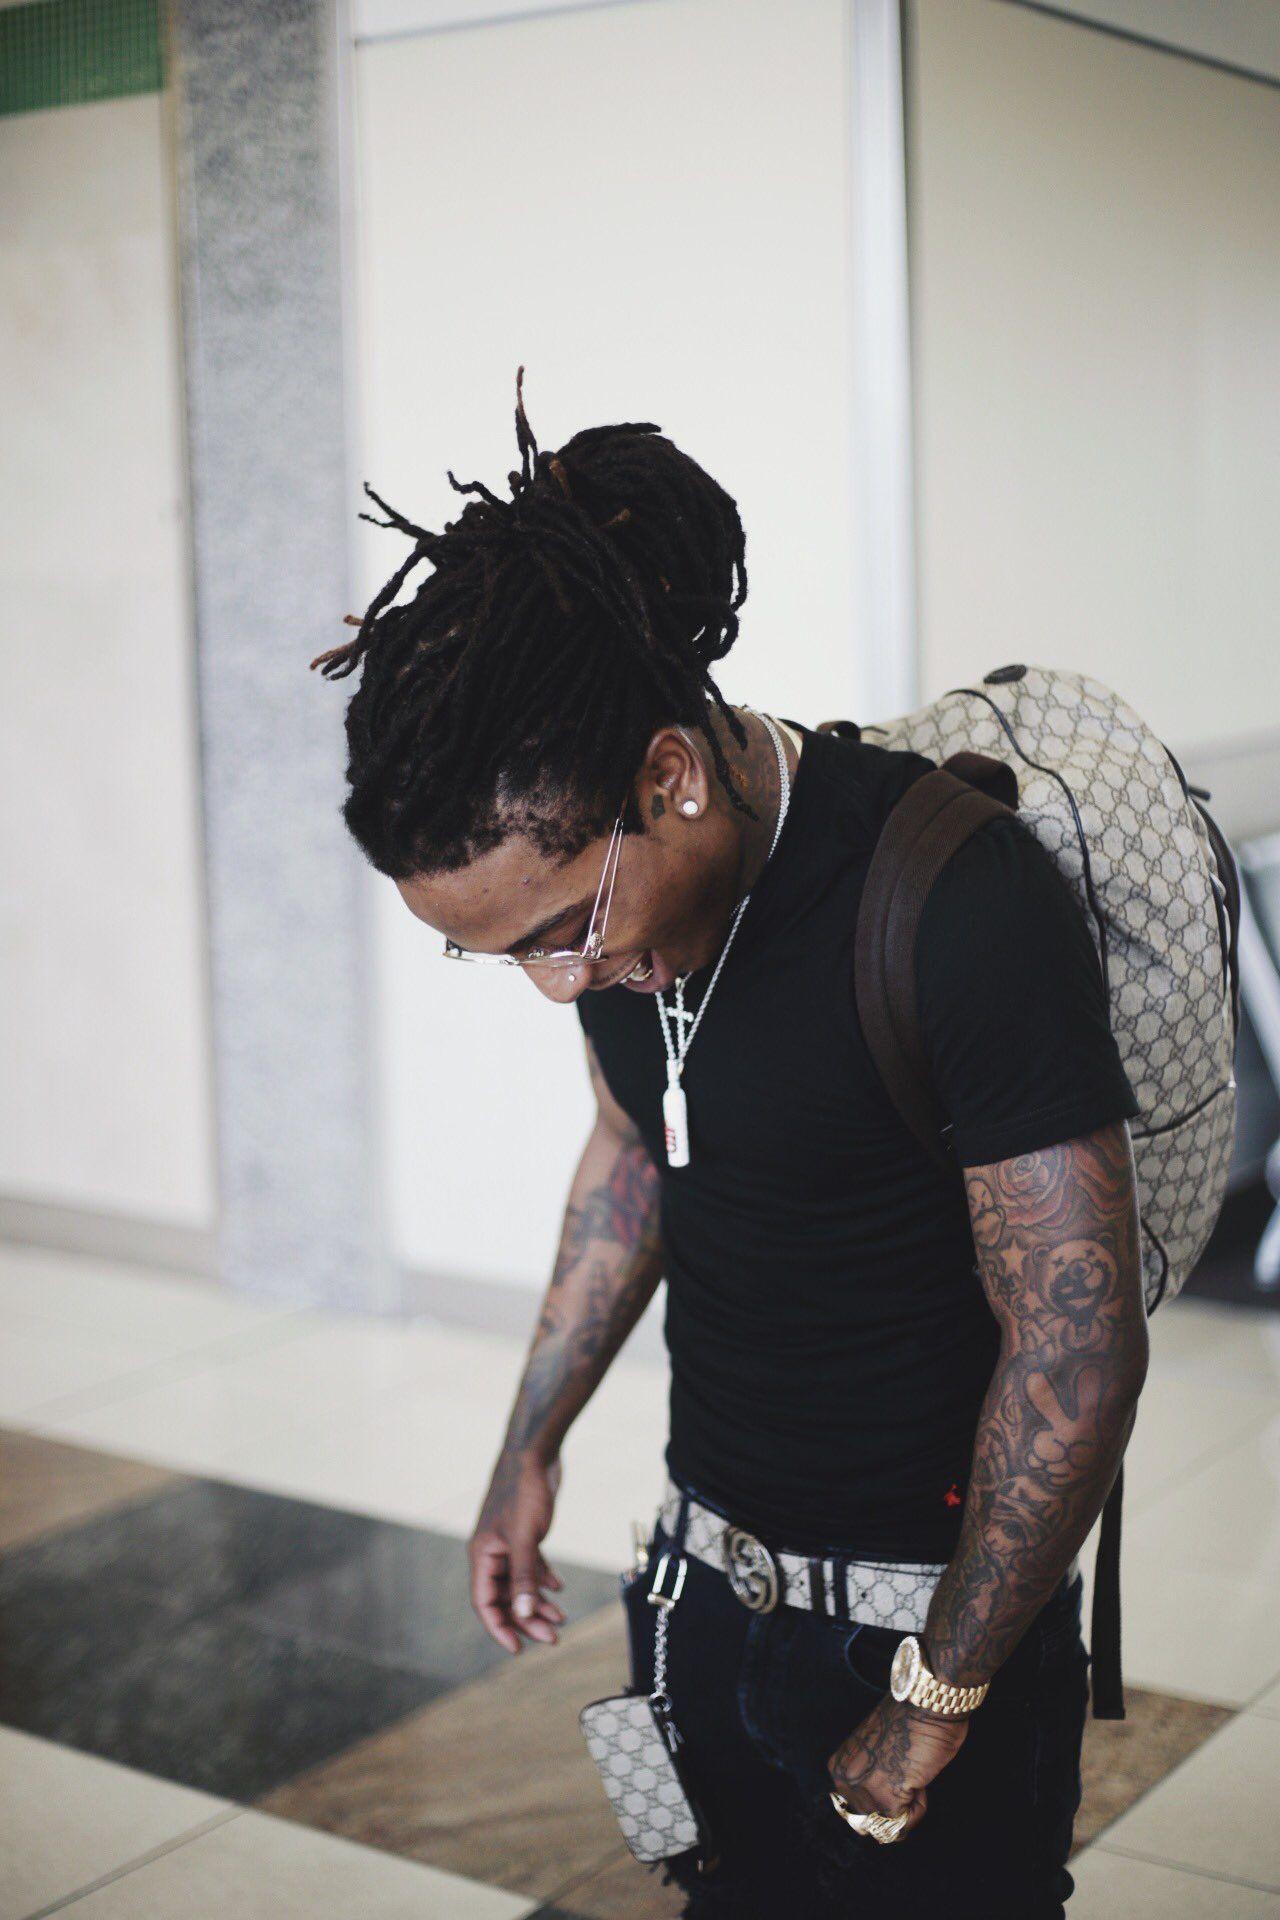 Jacquees ❤. MY Baby Jacquee$. Bae and Eye candy